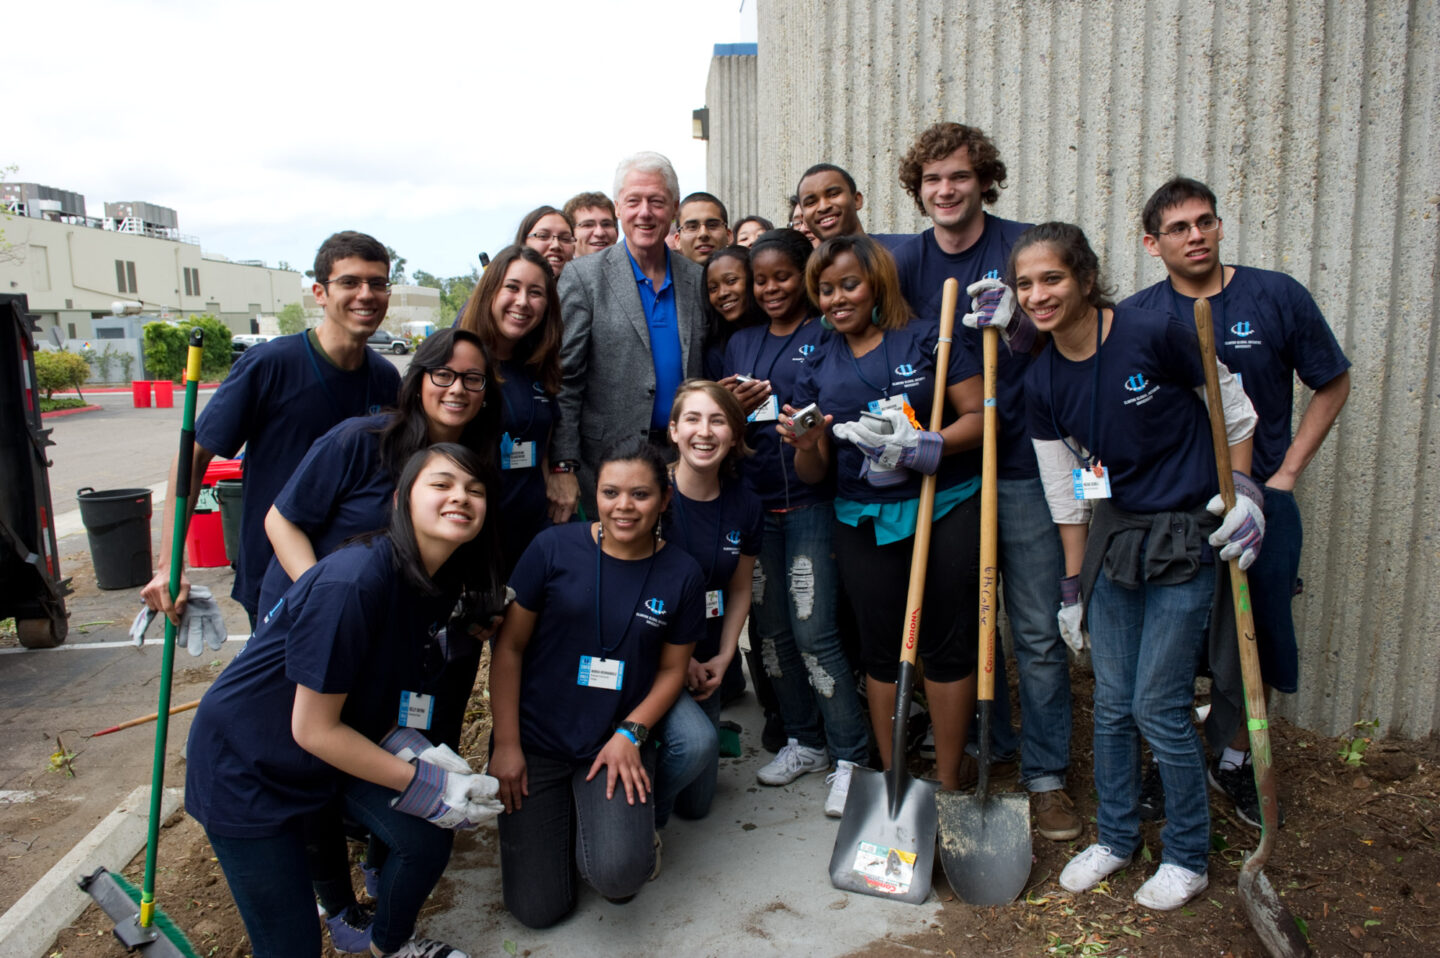 President Clinton takes a photo with student volunteers in San Diego